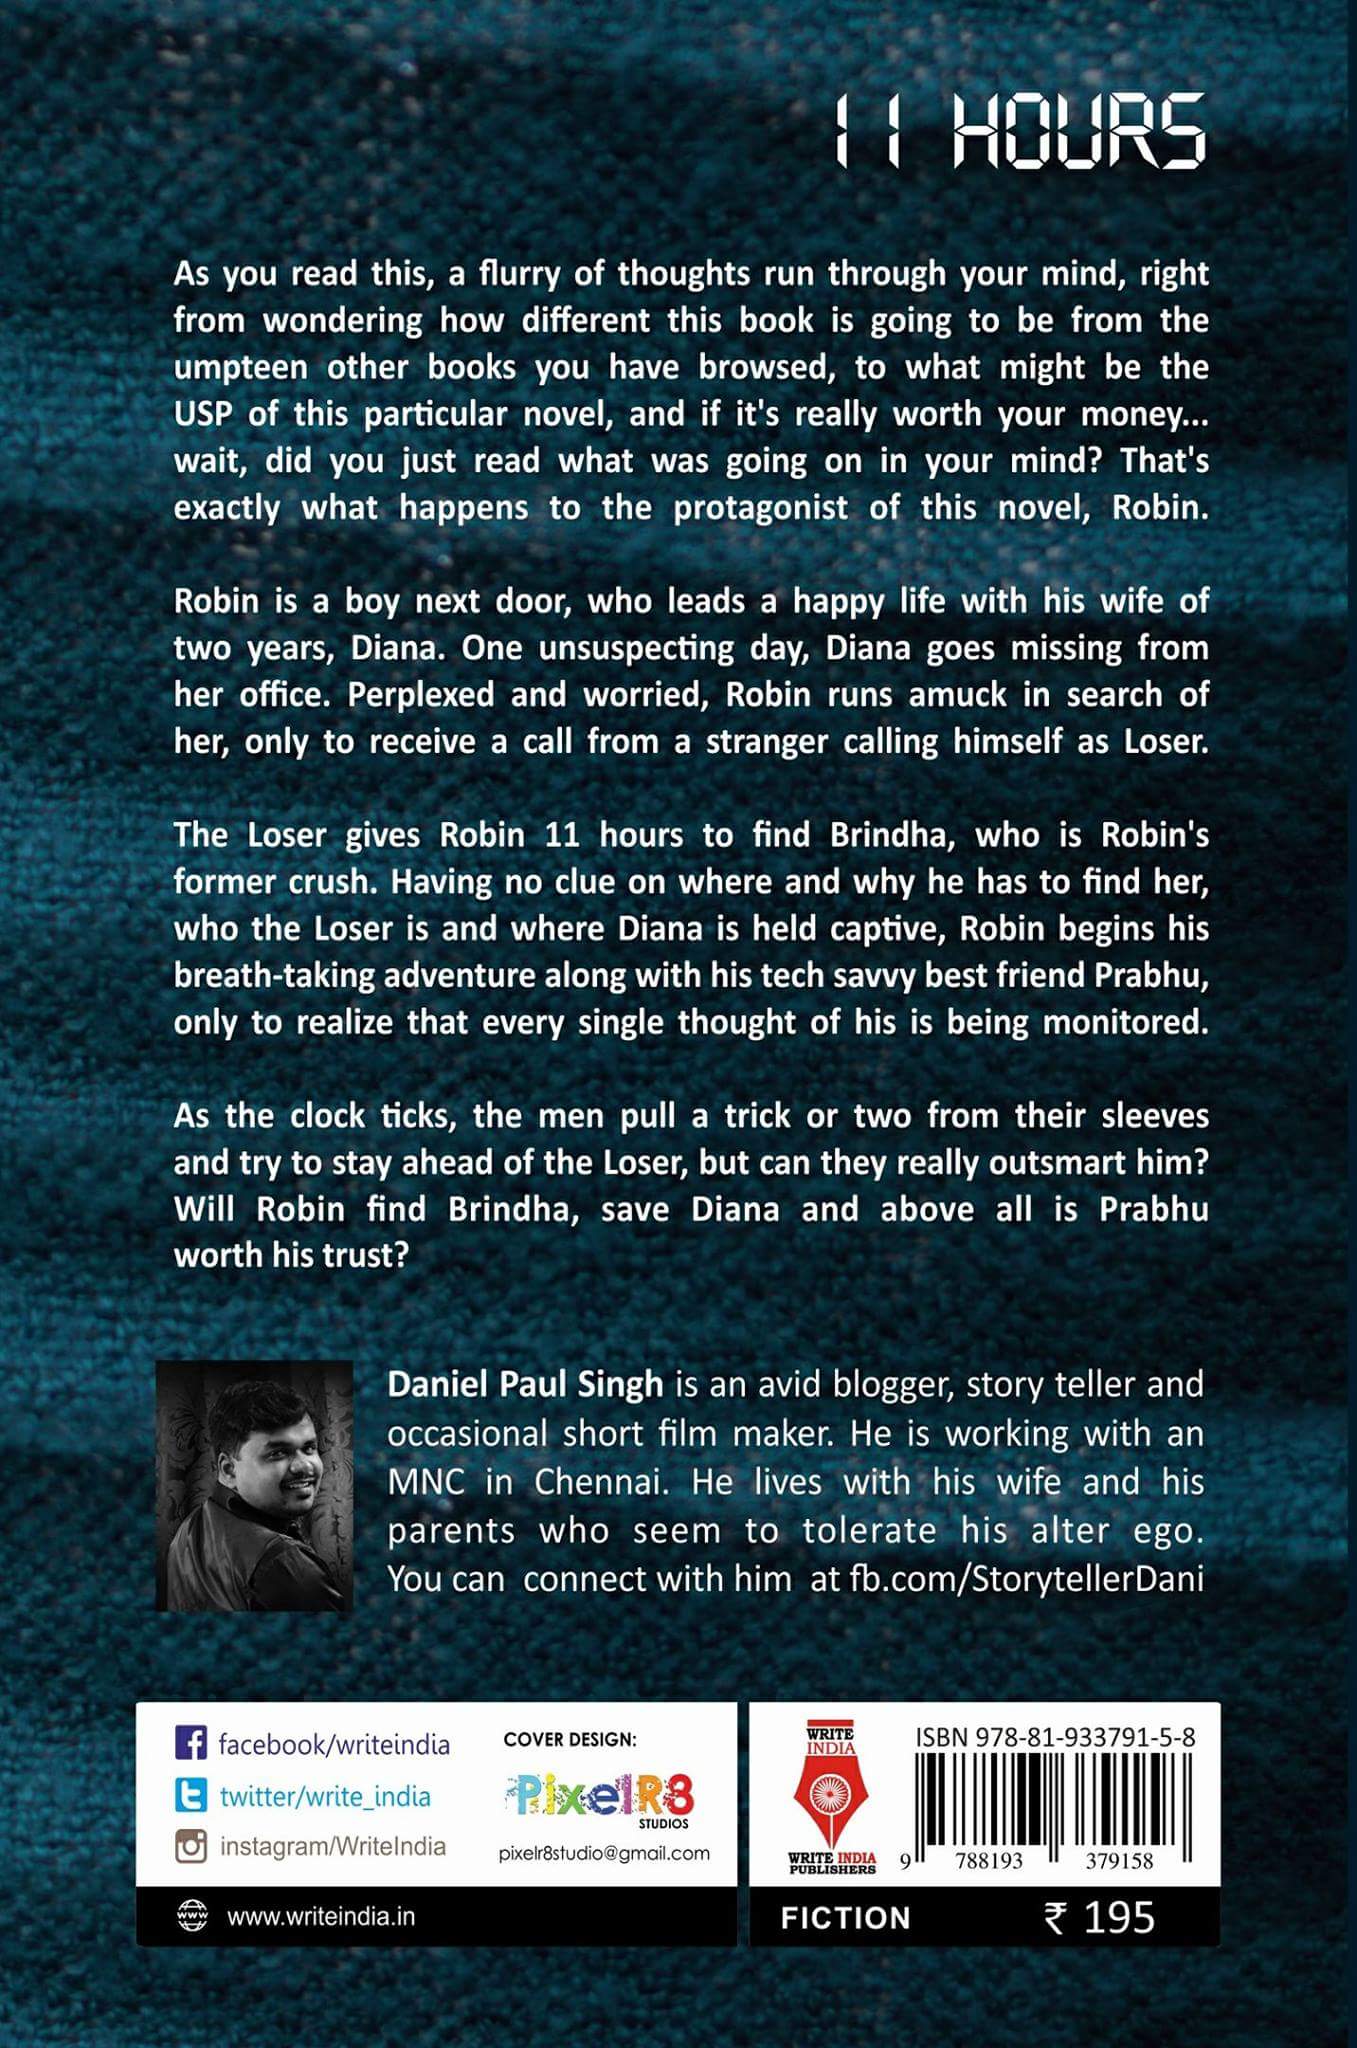 29 Hours by Daniel on Twitter: "Here is the blurb of the novel